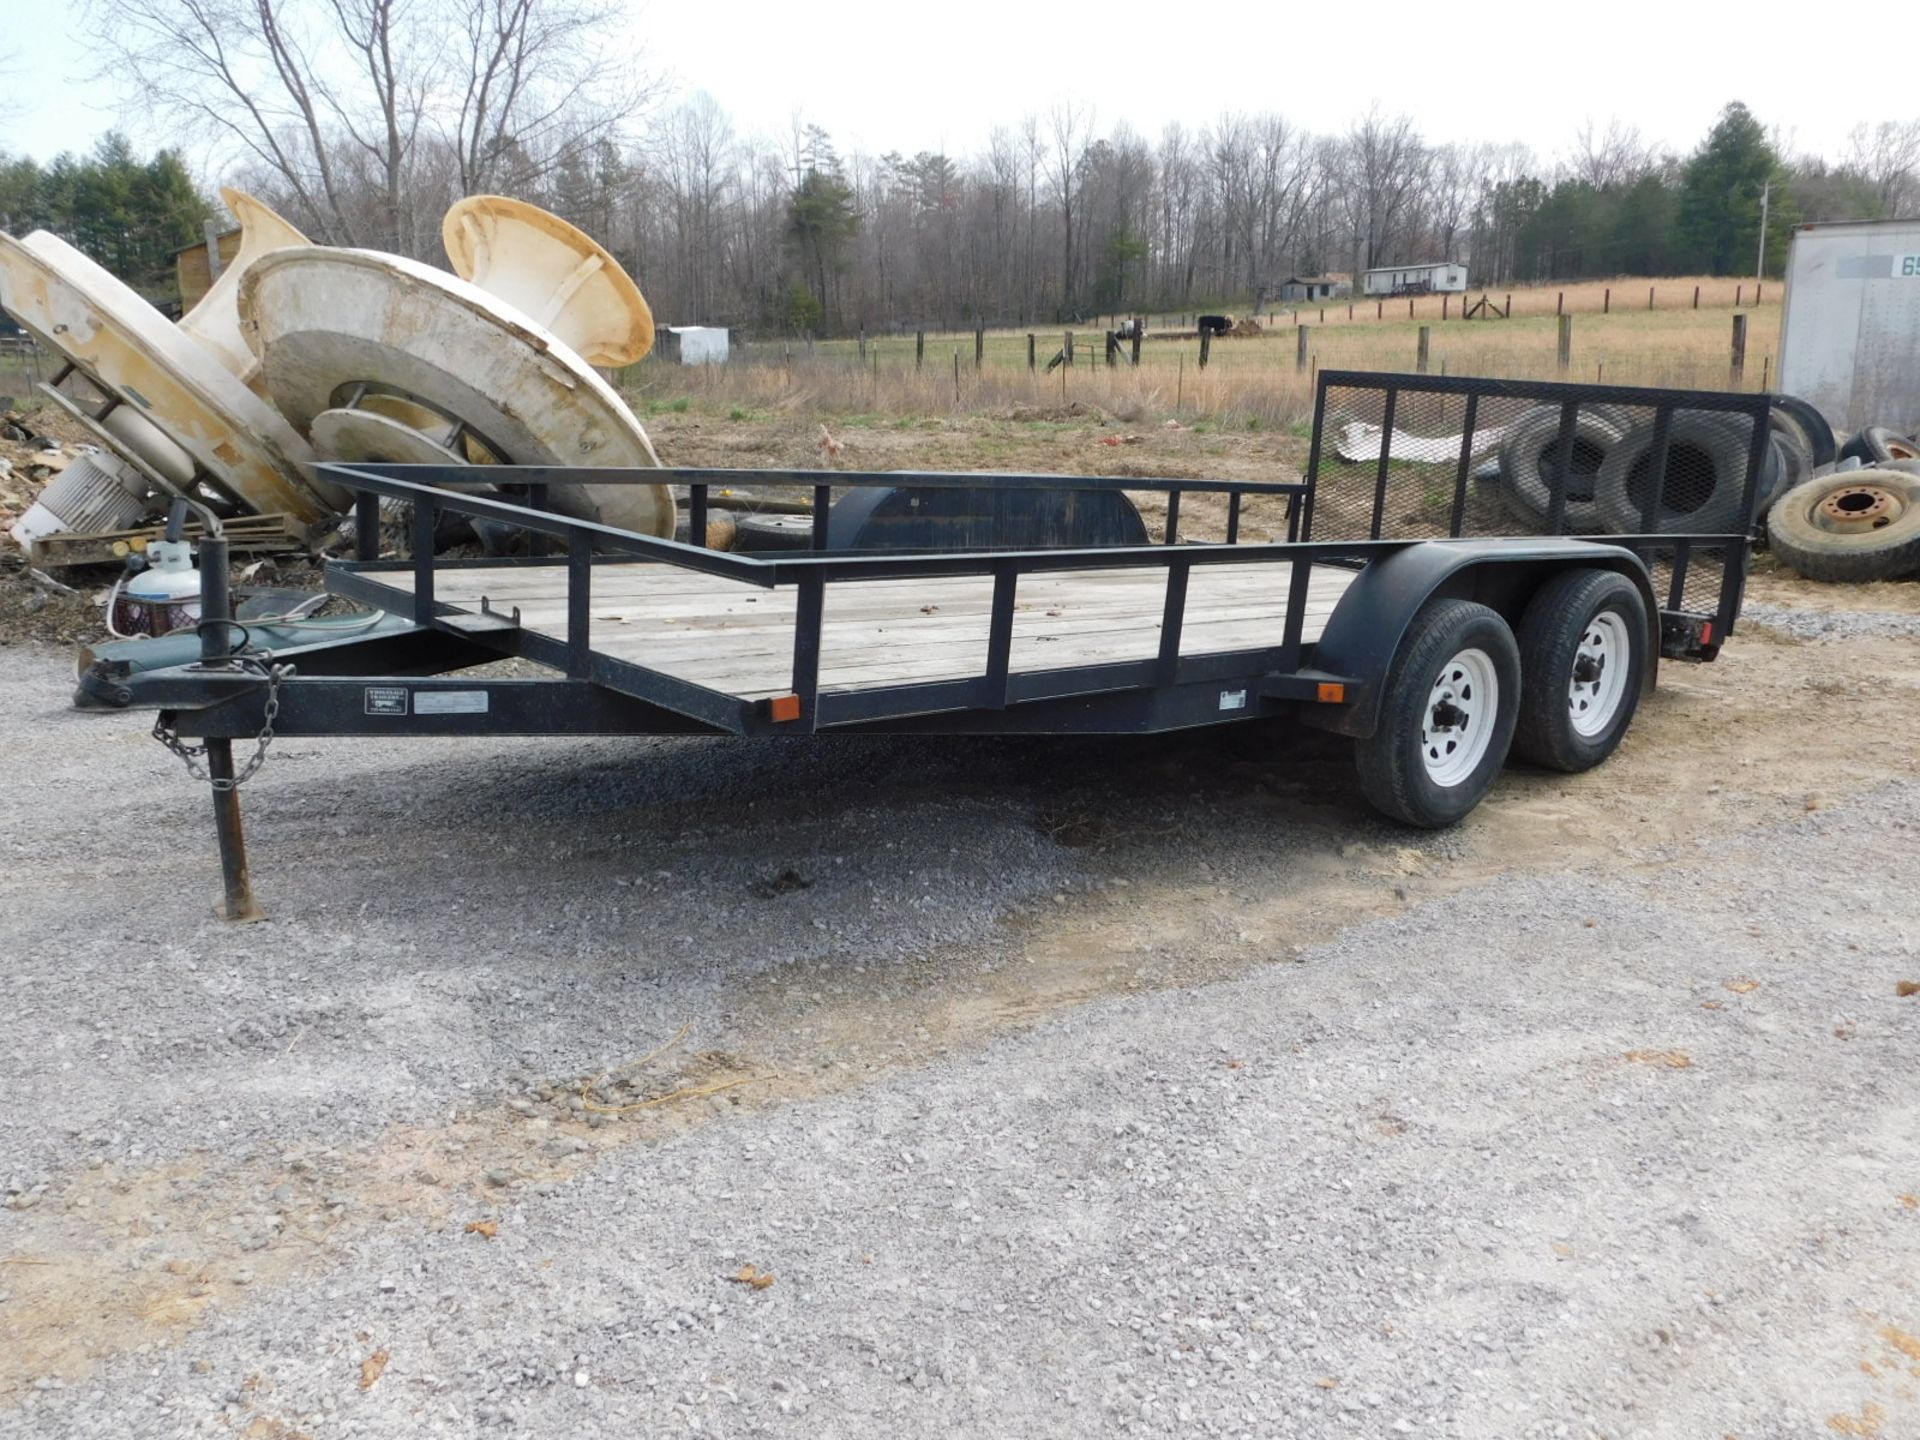 2014 G&G Manufacturing 16' x 82" Equipment Trailer, 2-Axle, 18" dove tail w/ramps, 7,000 GVWR, "NO